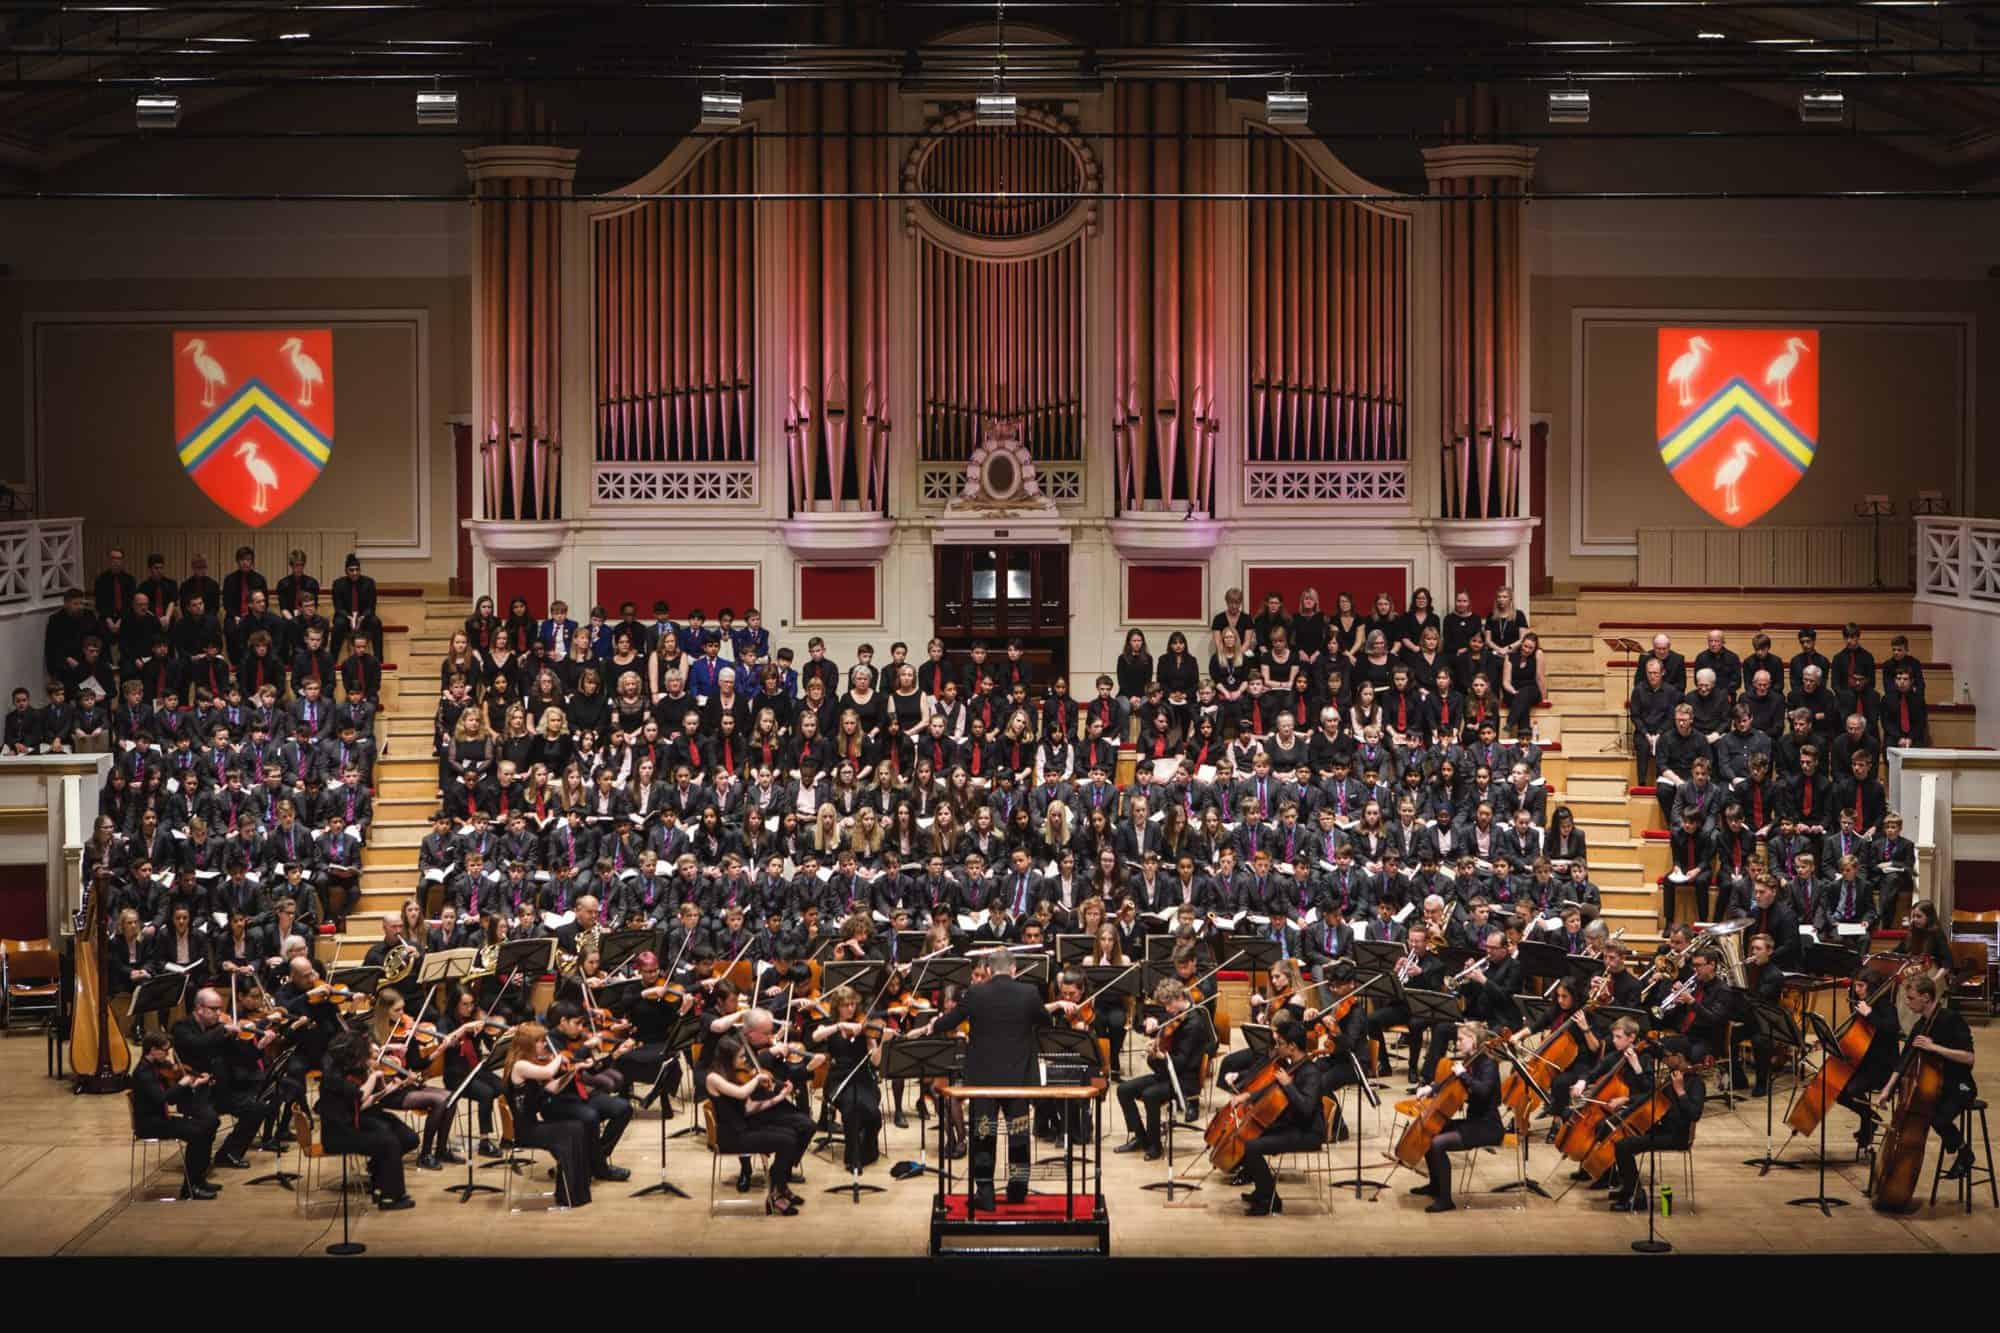 Loughborough Schools Music Presents: Spring Concert featured image